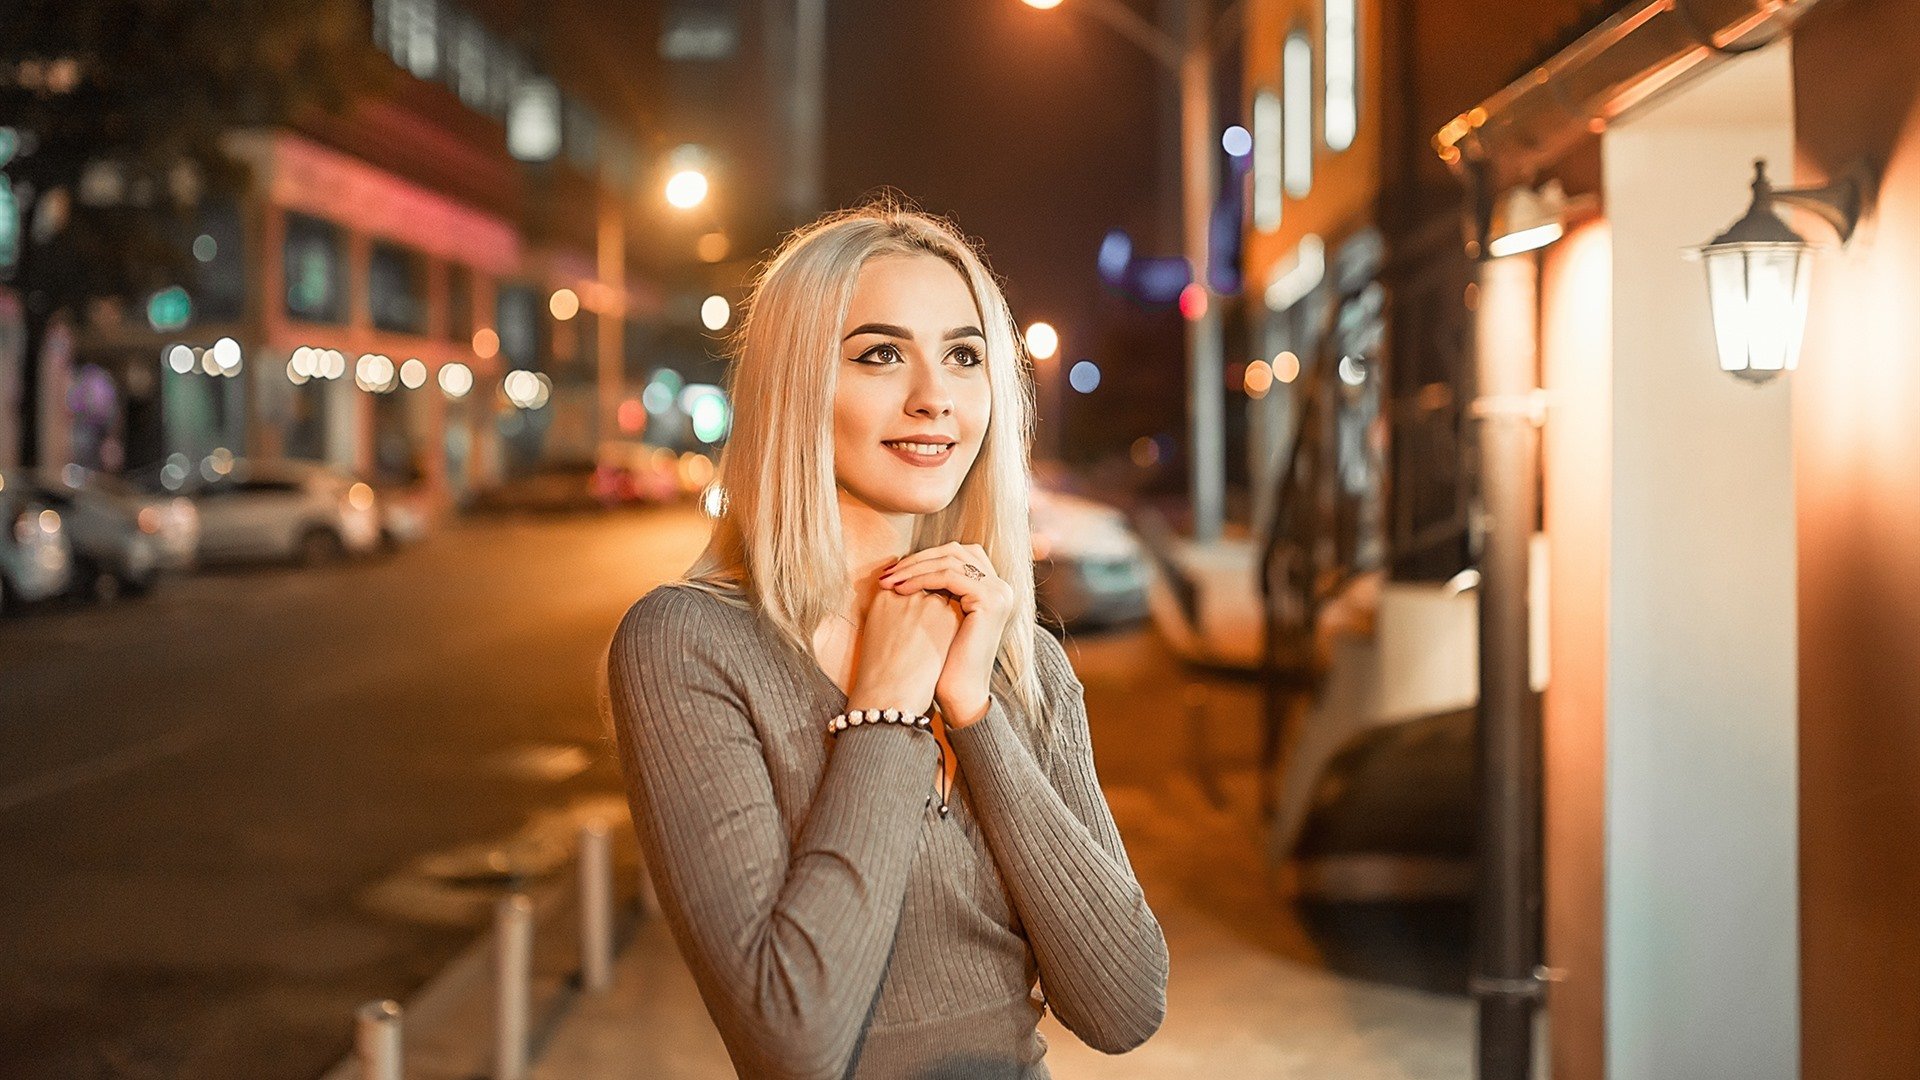 Wallpaper Blonde girl, smile, night, lights, city 1920x1200 HD Picture, Image